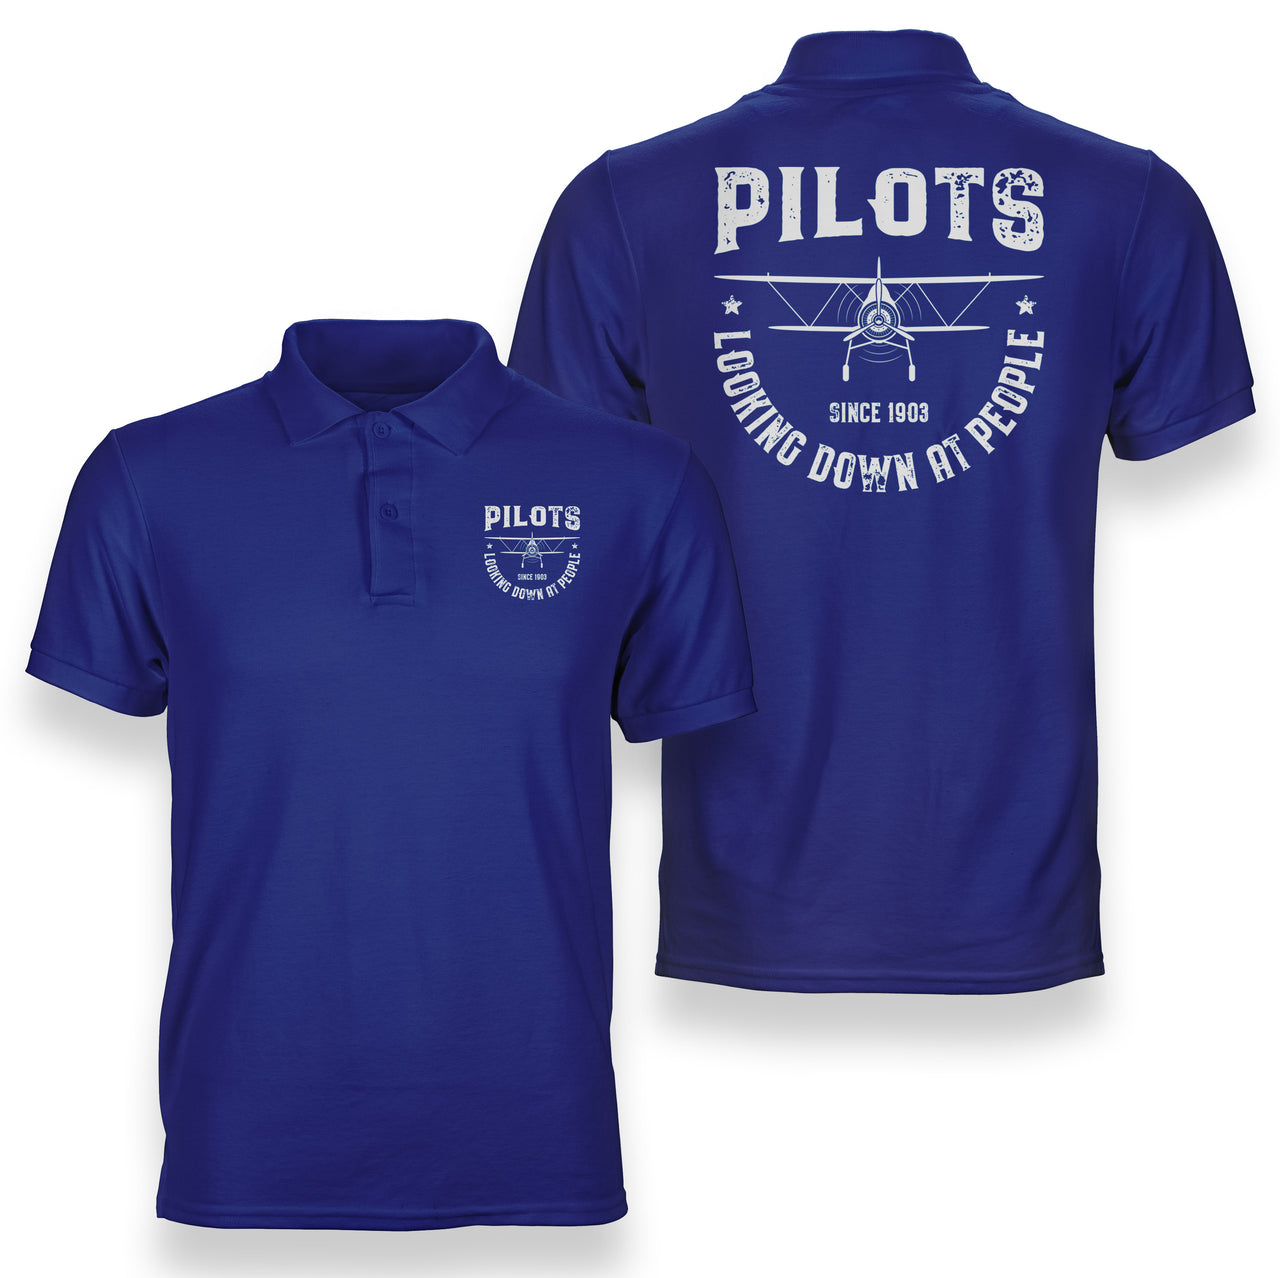 Pilots Looking Down at People Since 1903 Designed Double Side Polo T-Shirts